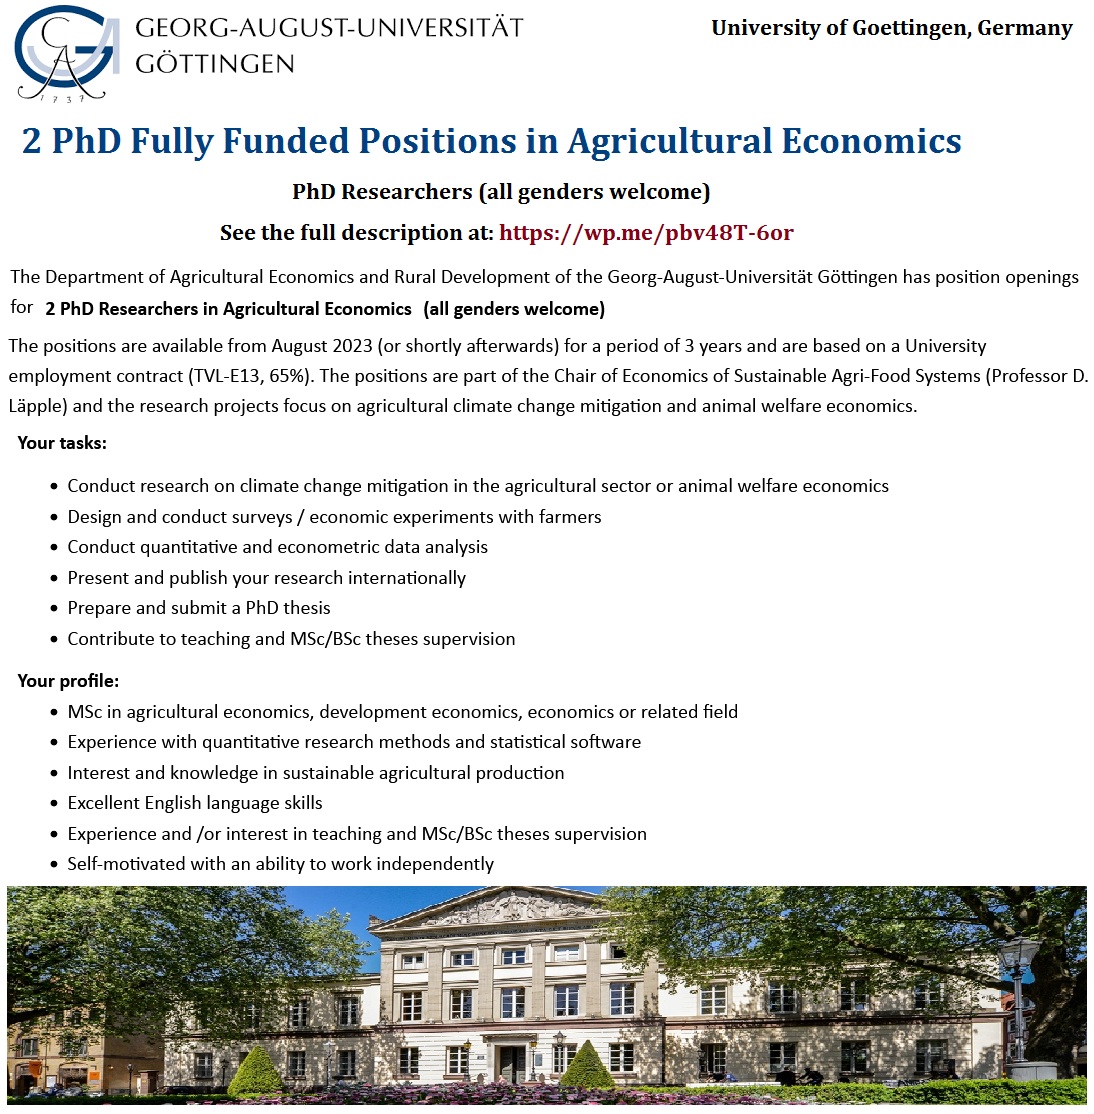 📌 2 PhD Fully Funded Positions in Agricultural Economics at University of Göttingen in Germany 🇩🇪... Please Retweet and spread the word! For details visit: wp.me/pbv48T-6or